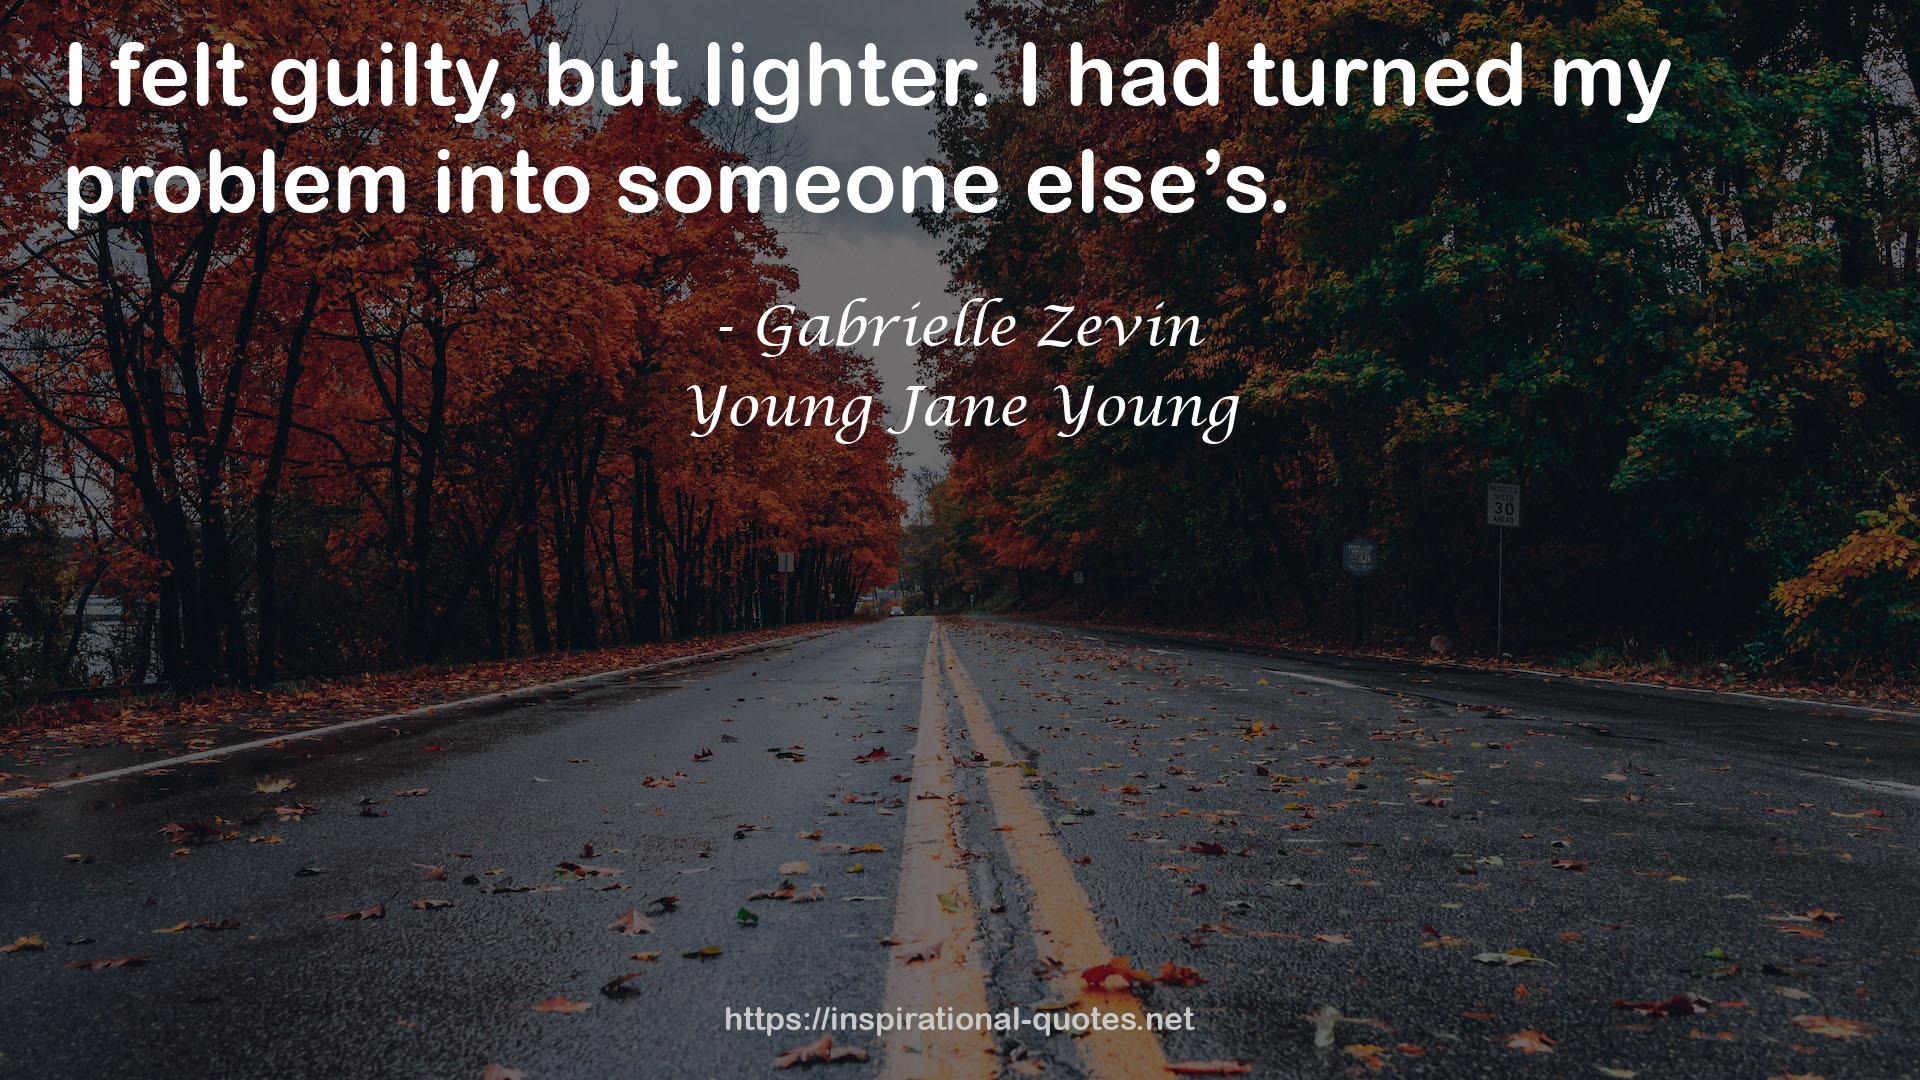 Young Jane Young QUOTES